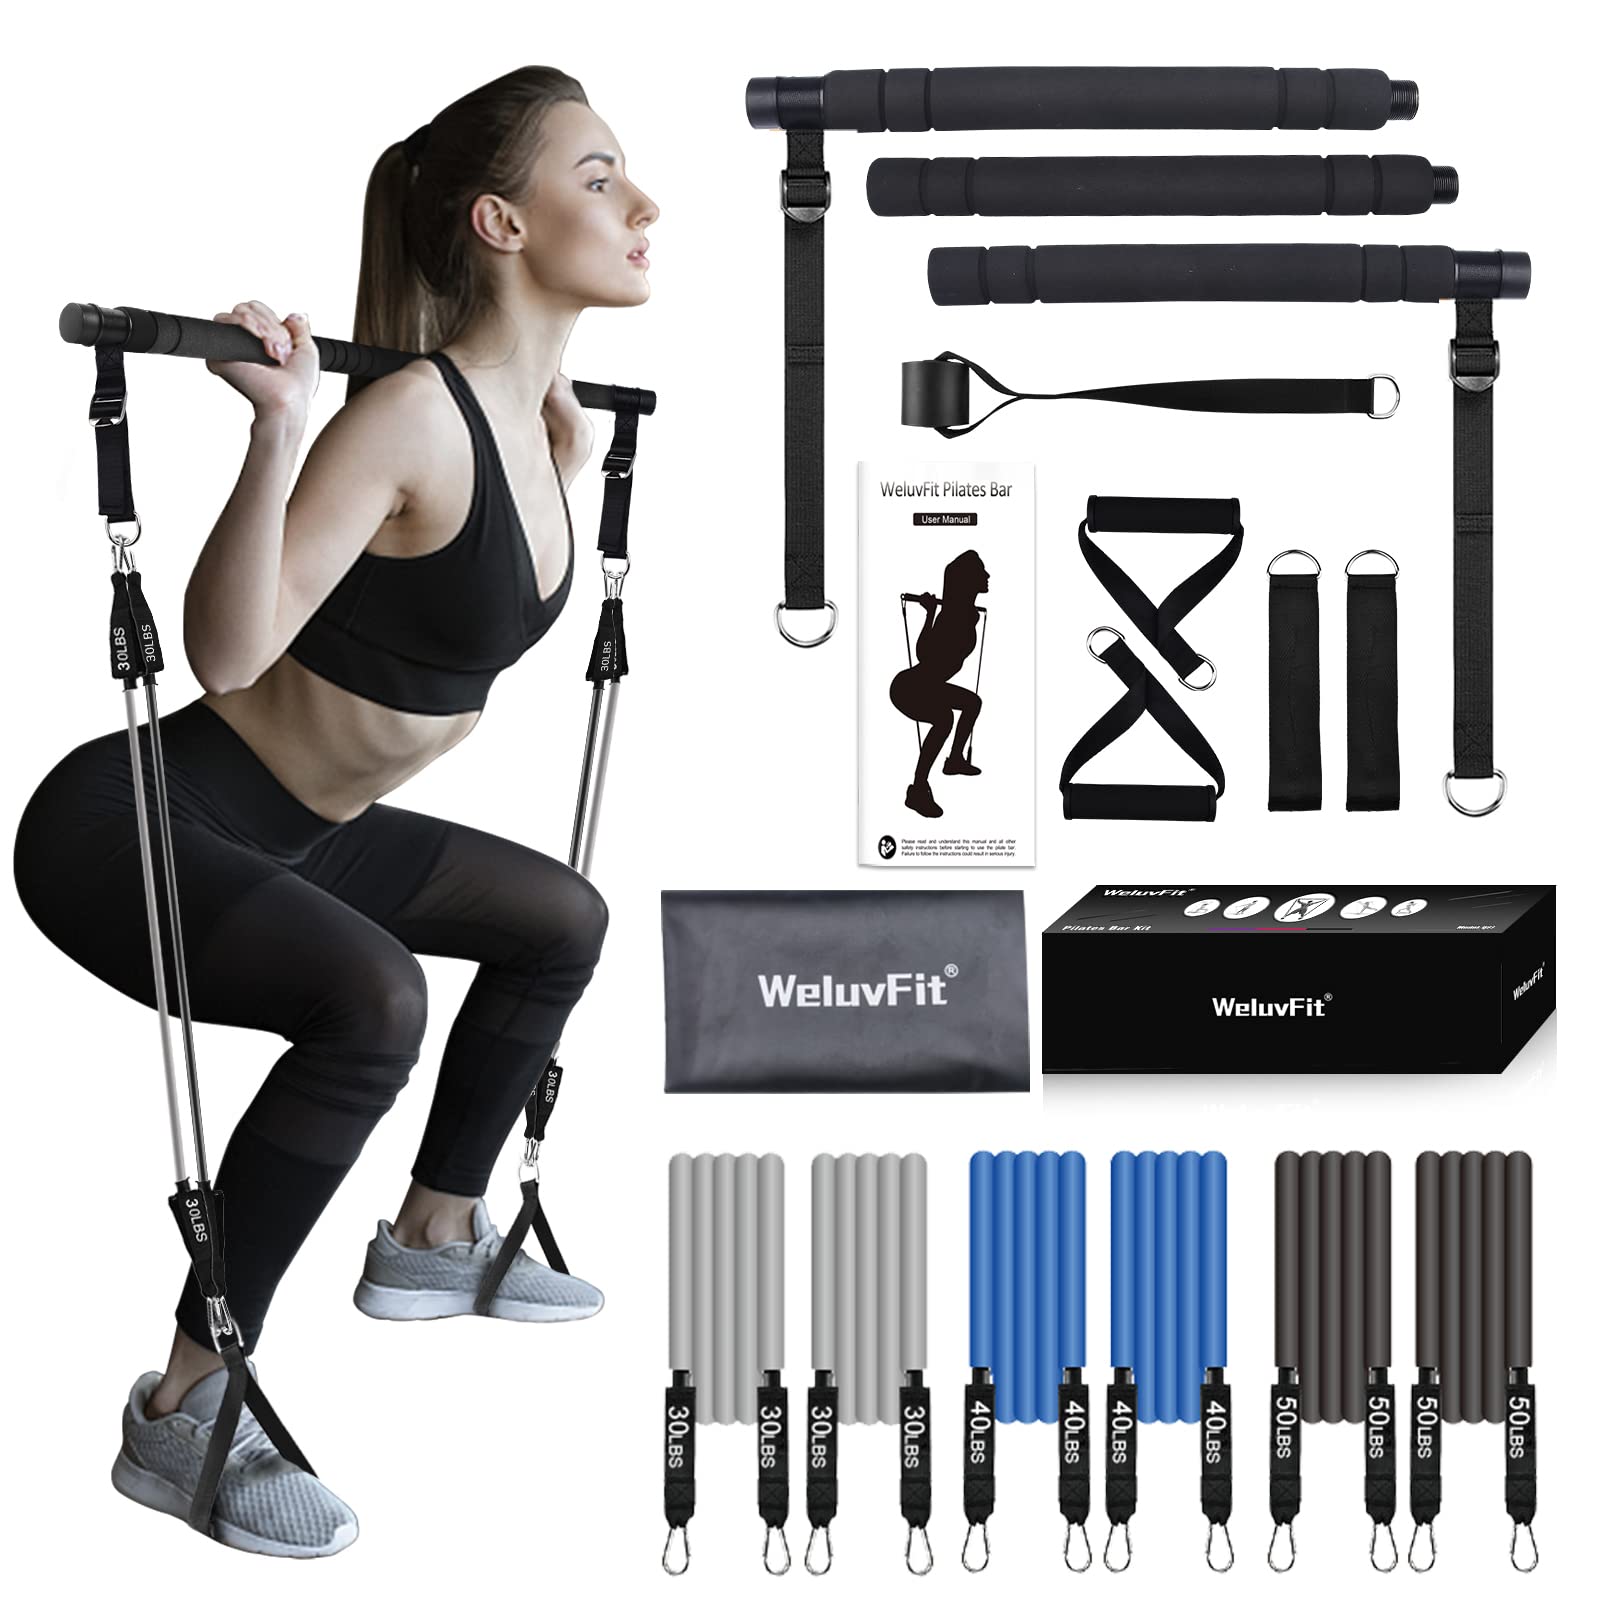 Pilates Bar Kit with Resistance Bands, WeluvFit Fitness Equipment for Women & Men, Gym Home Workouts Stainless Steel Stick Squat Yoga Pilates Flexbands Kit